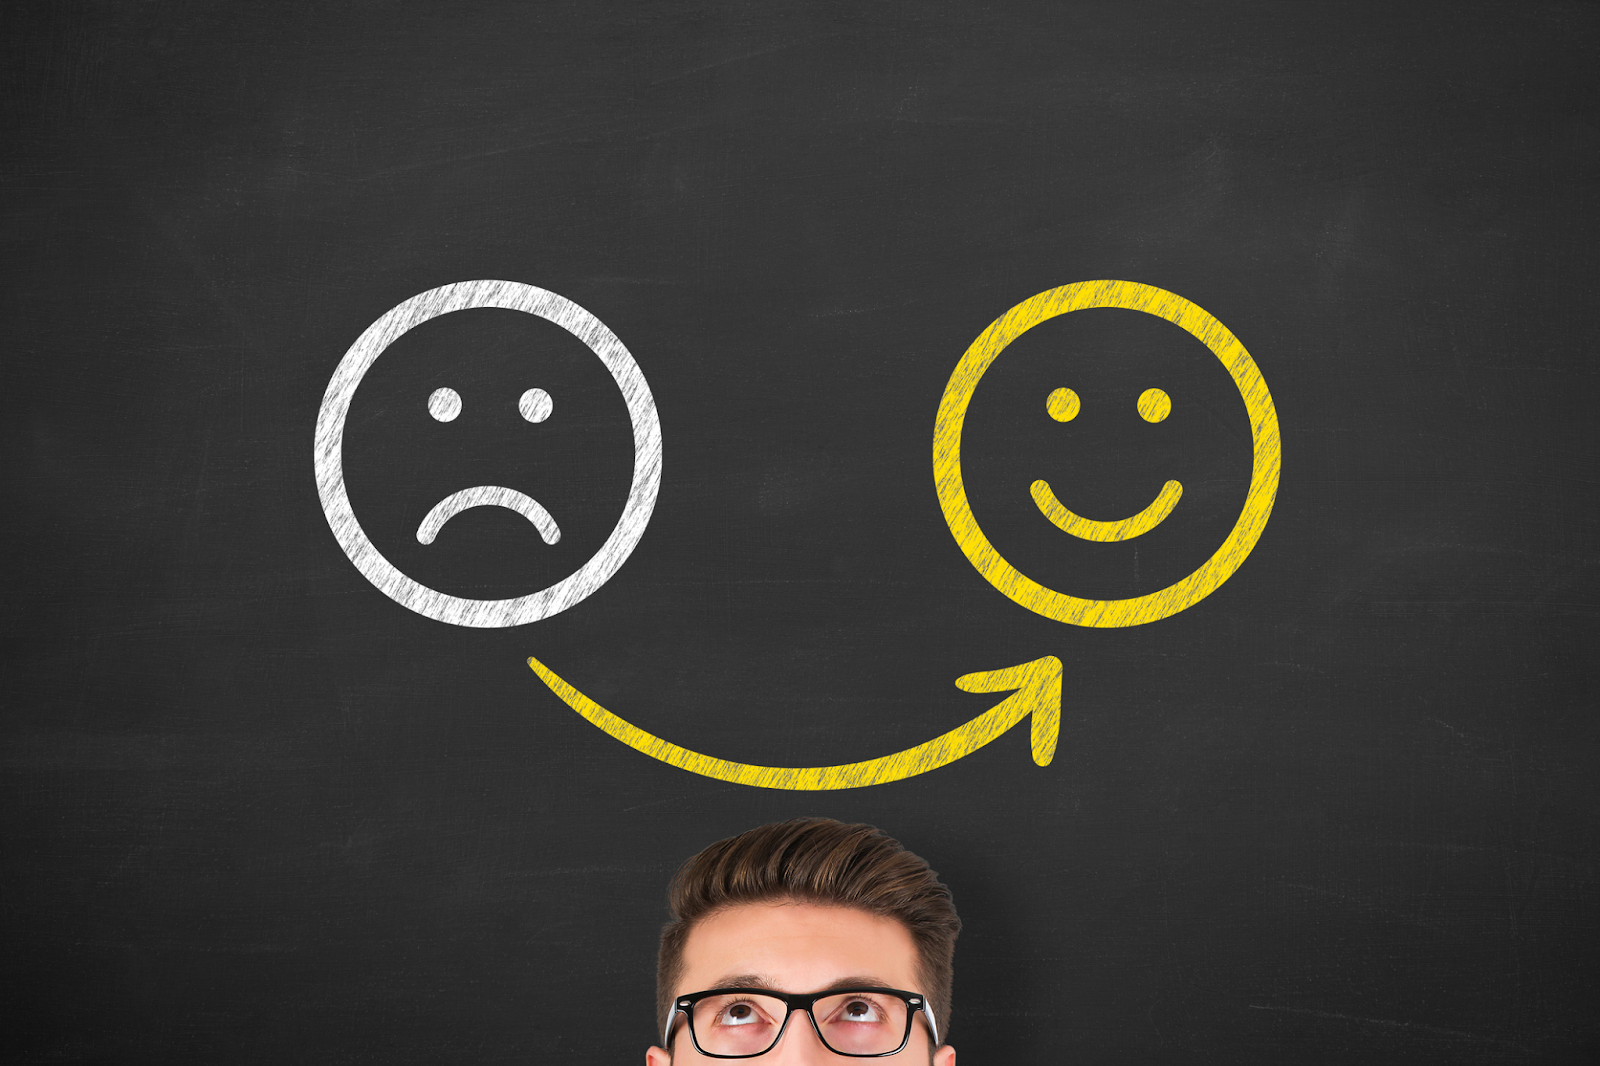 Expert speaker addresses negative feedback in front of blackboard with smiley faces